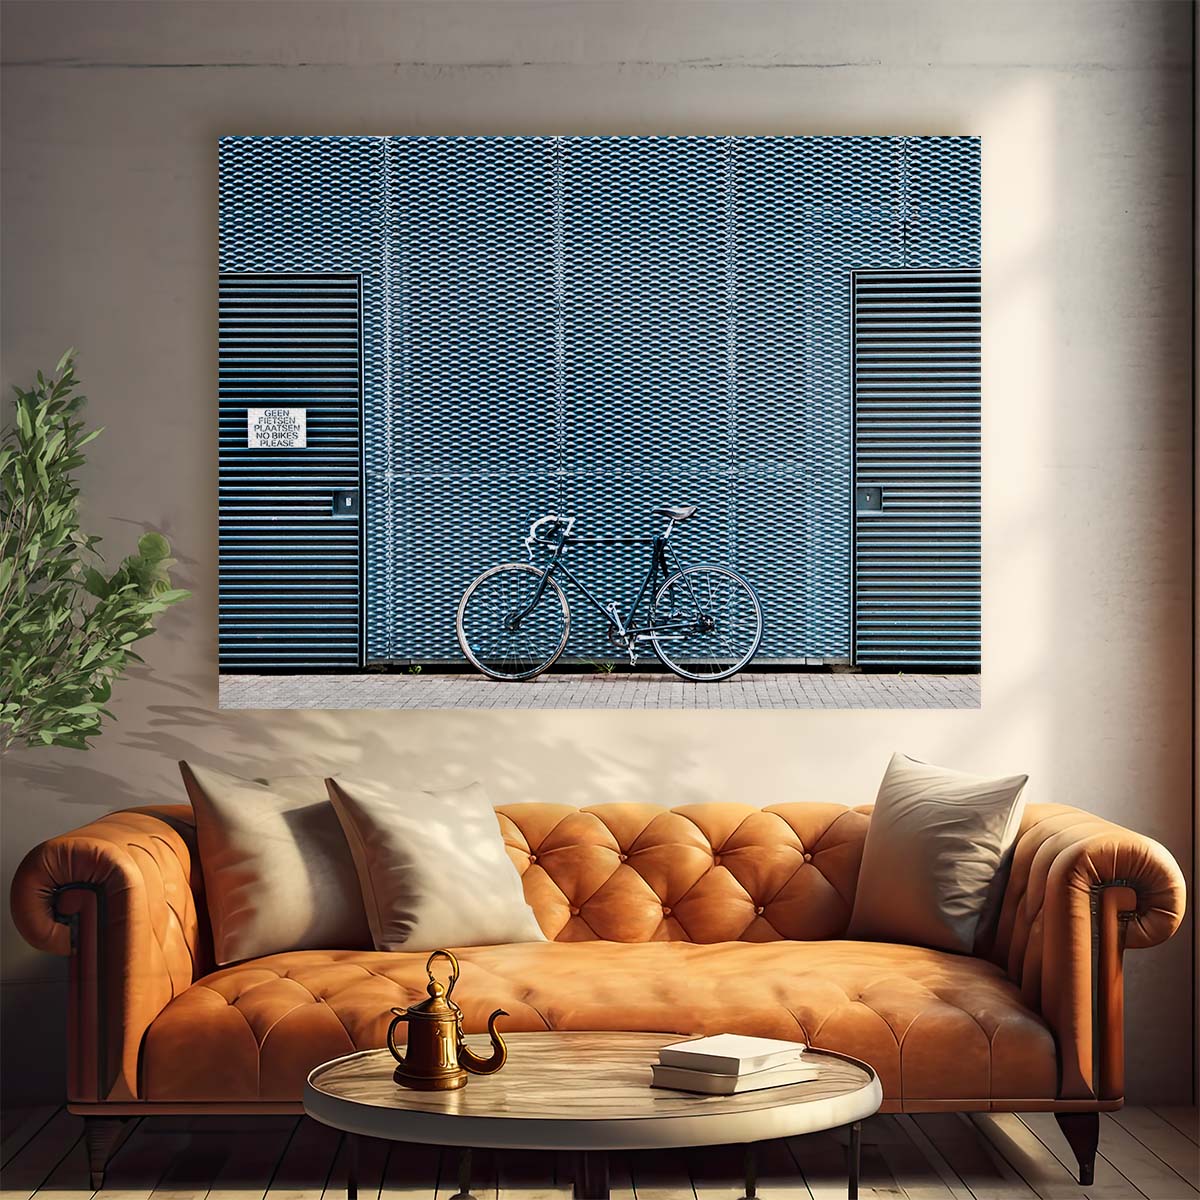 Abstract No Parking Bikes Metal Sign Wall Art by Luxuriance Designs. Made in USA.